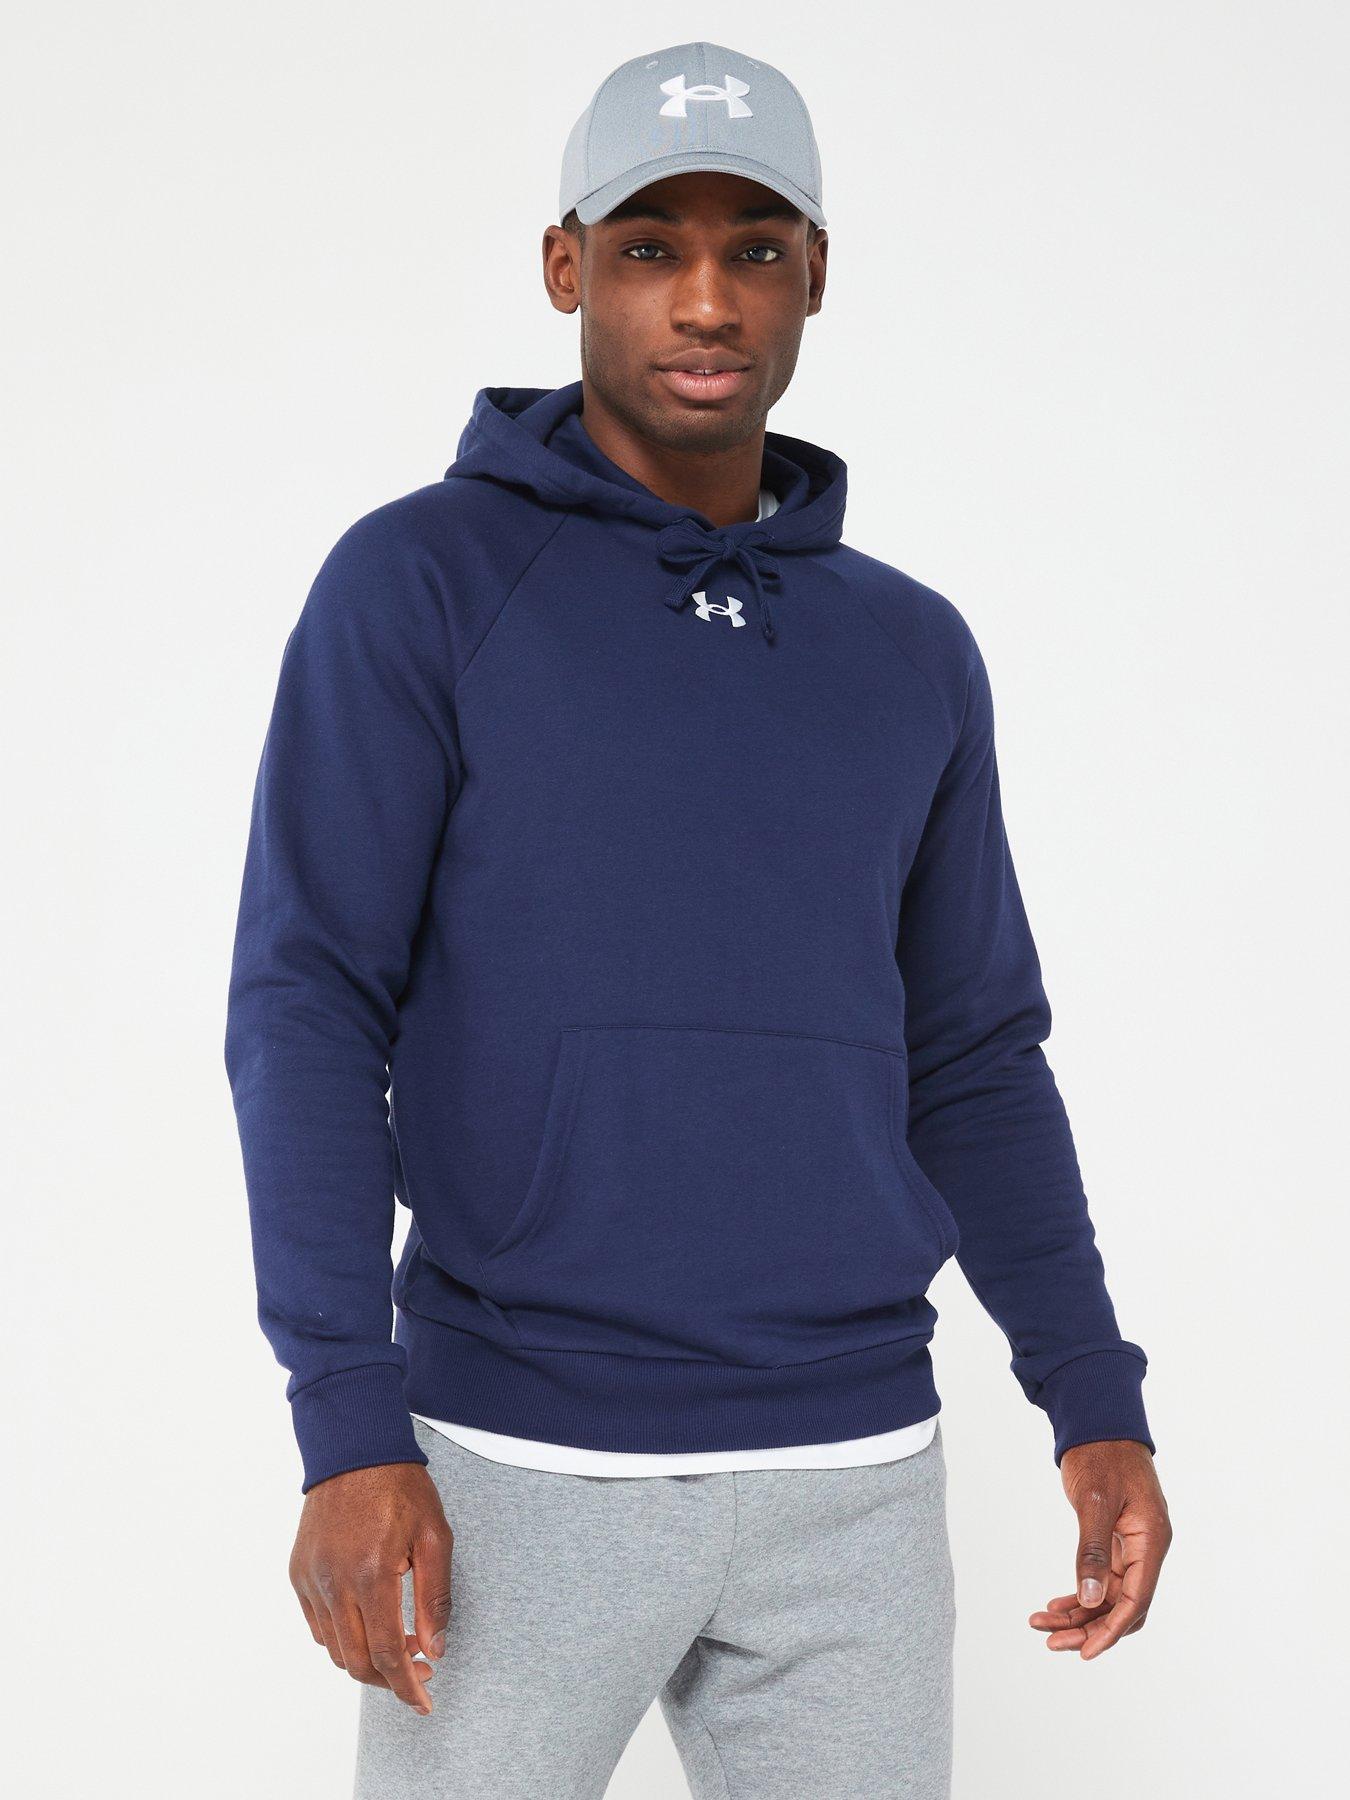 Under Armour Ua Command Warm-up Short Sleeve Hoodie in Blue for Men